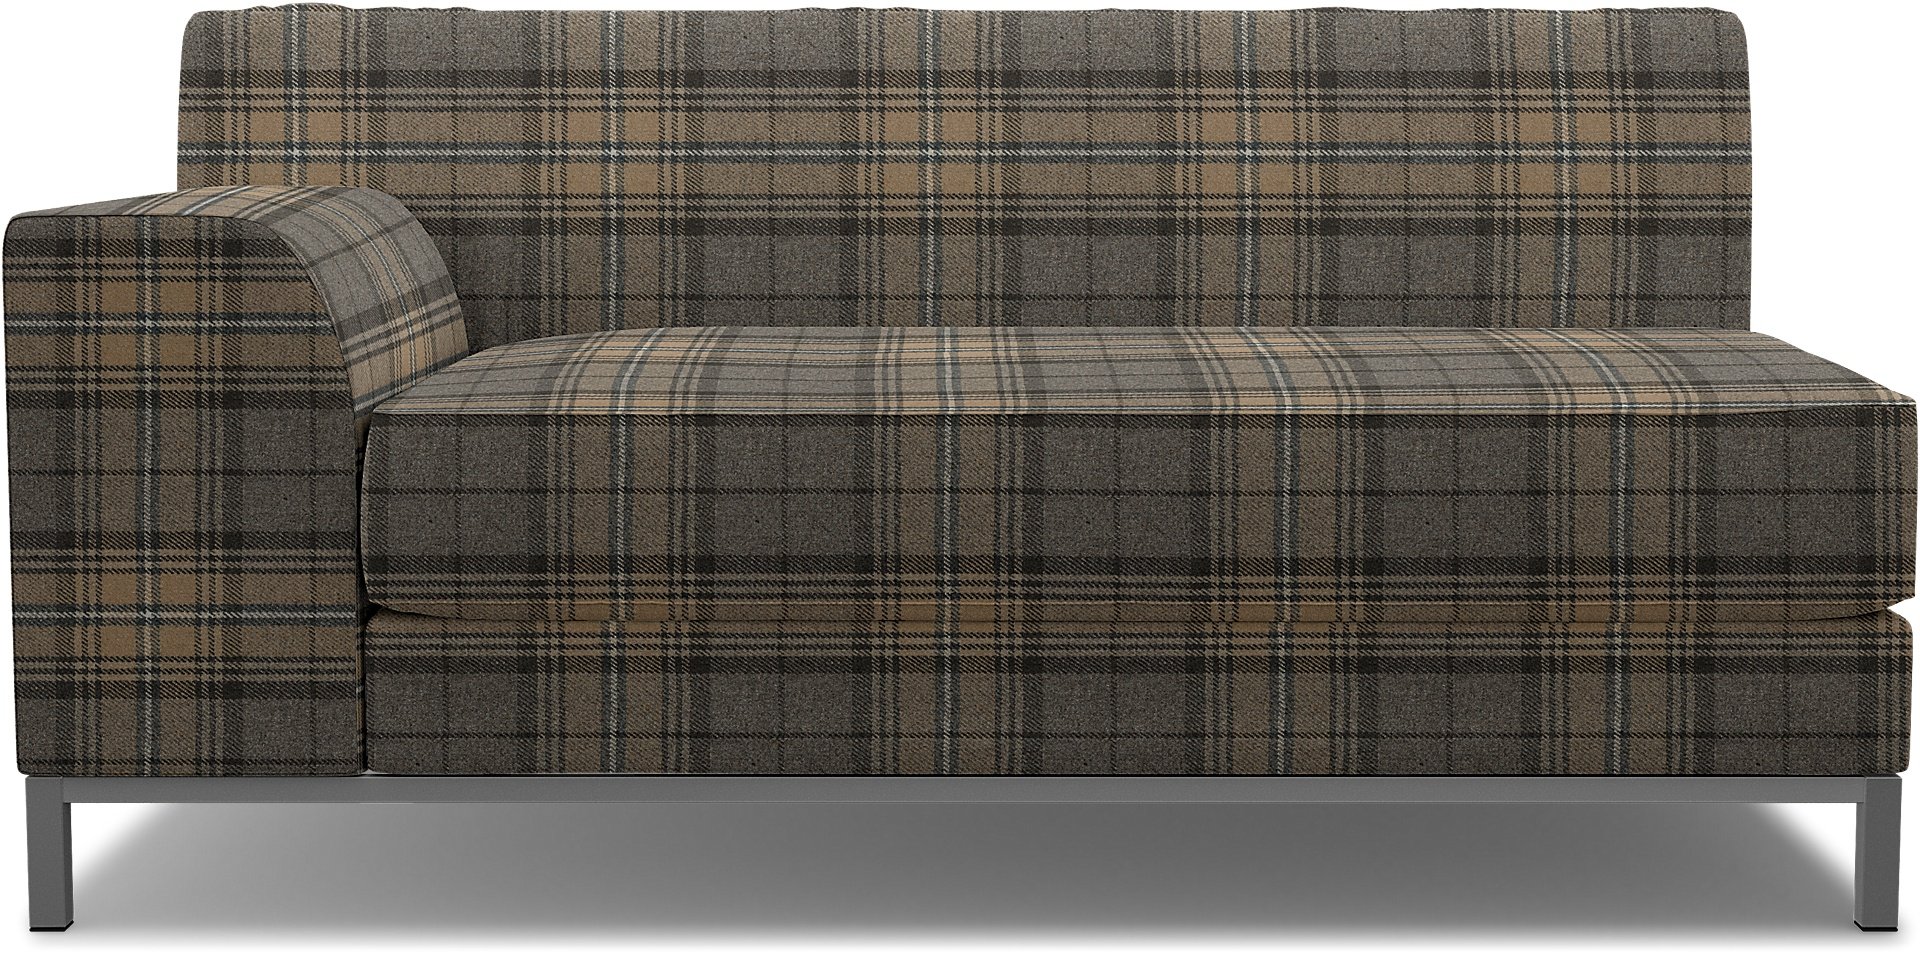 IKEA - Kramfors 2 Seater Sofa with Left Arm Cover, Bark Brown, Wool - Bemz